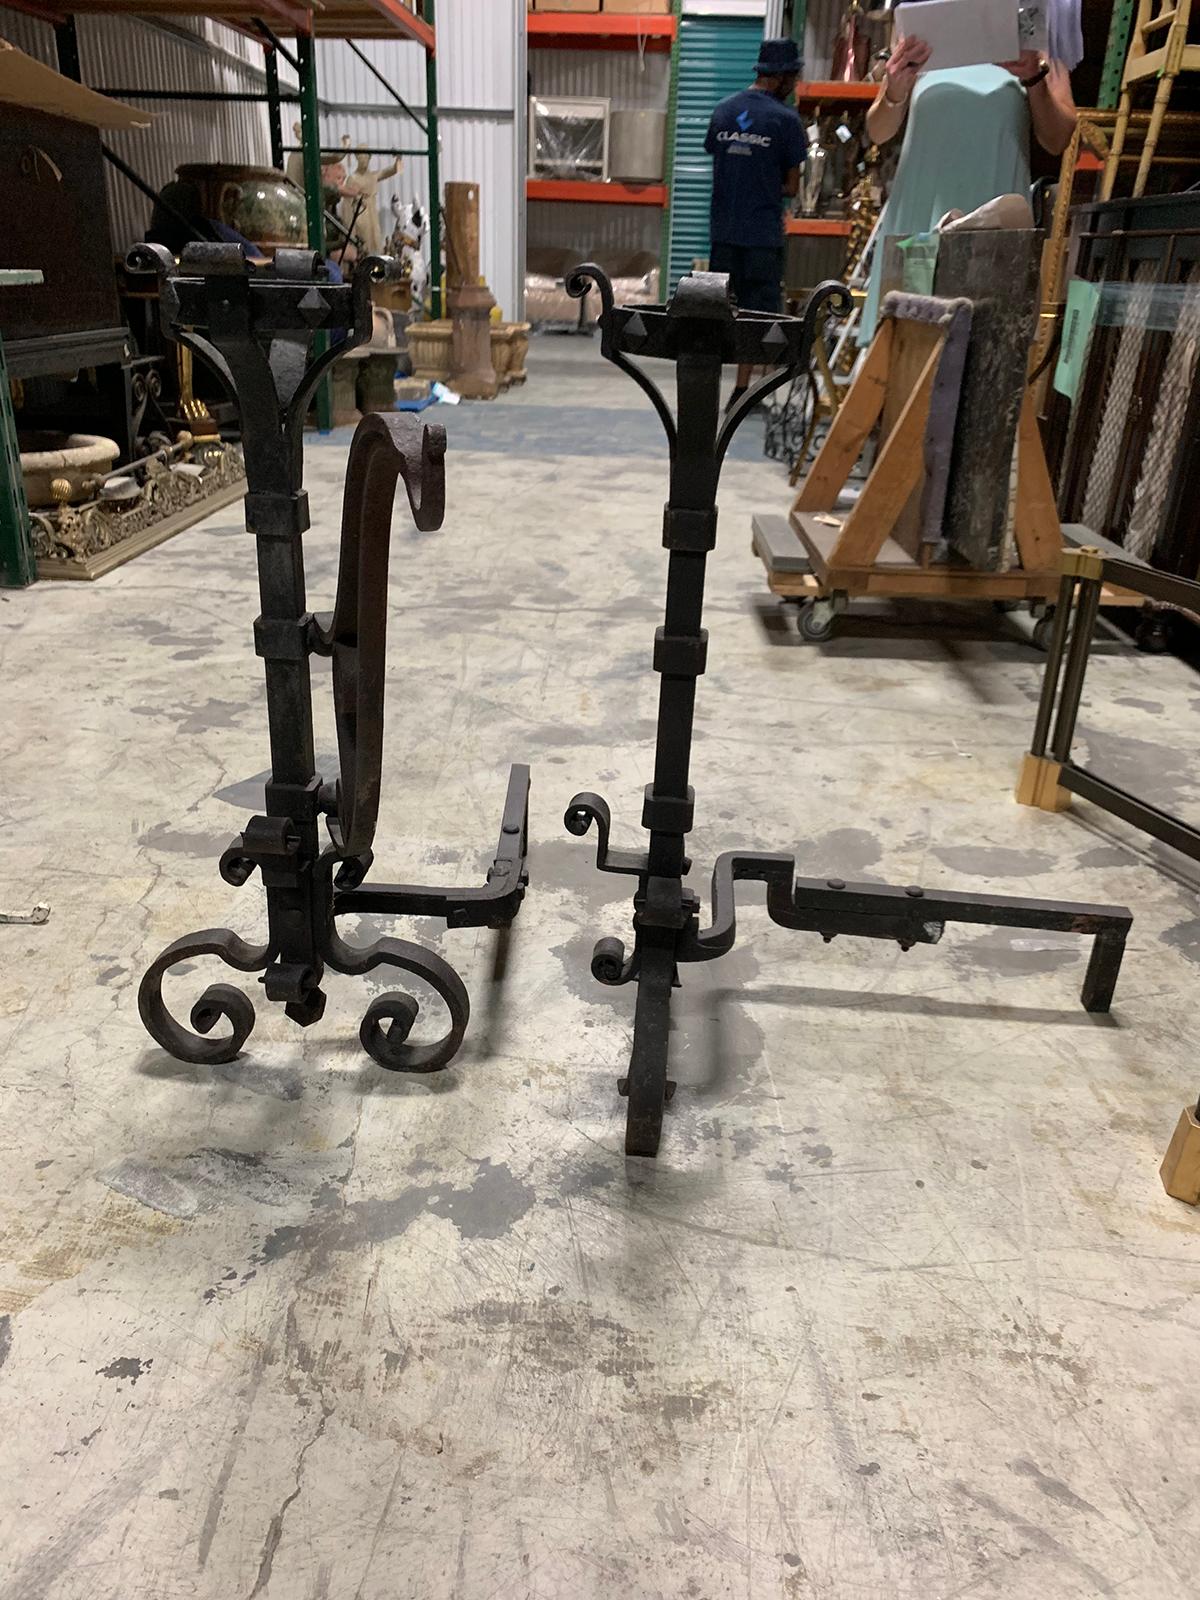 Pair of 19th Century Hand-Forged Iron Andirons with Swing-Arm for Cooking For Sale 11